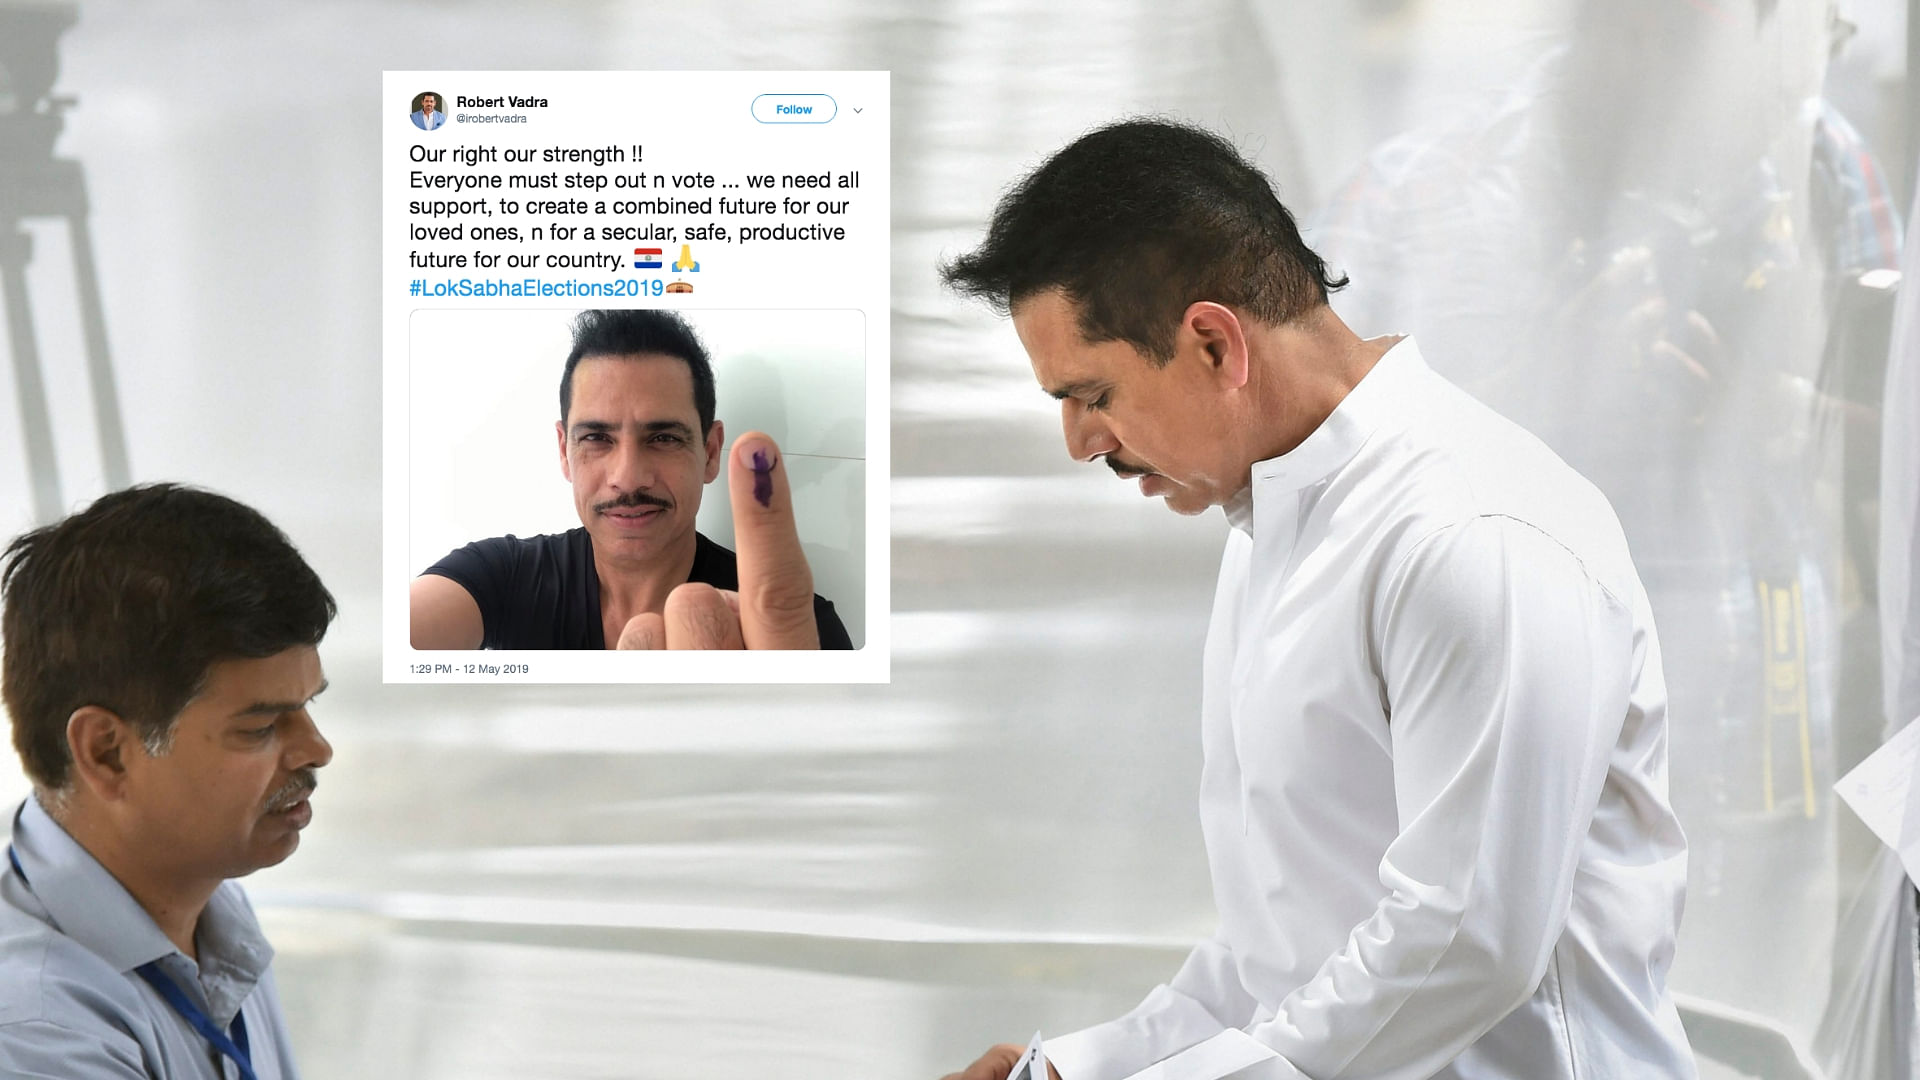 The post was later deleted, and Vadra put out another one where the Indian flag was correctly represented.